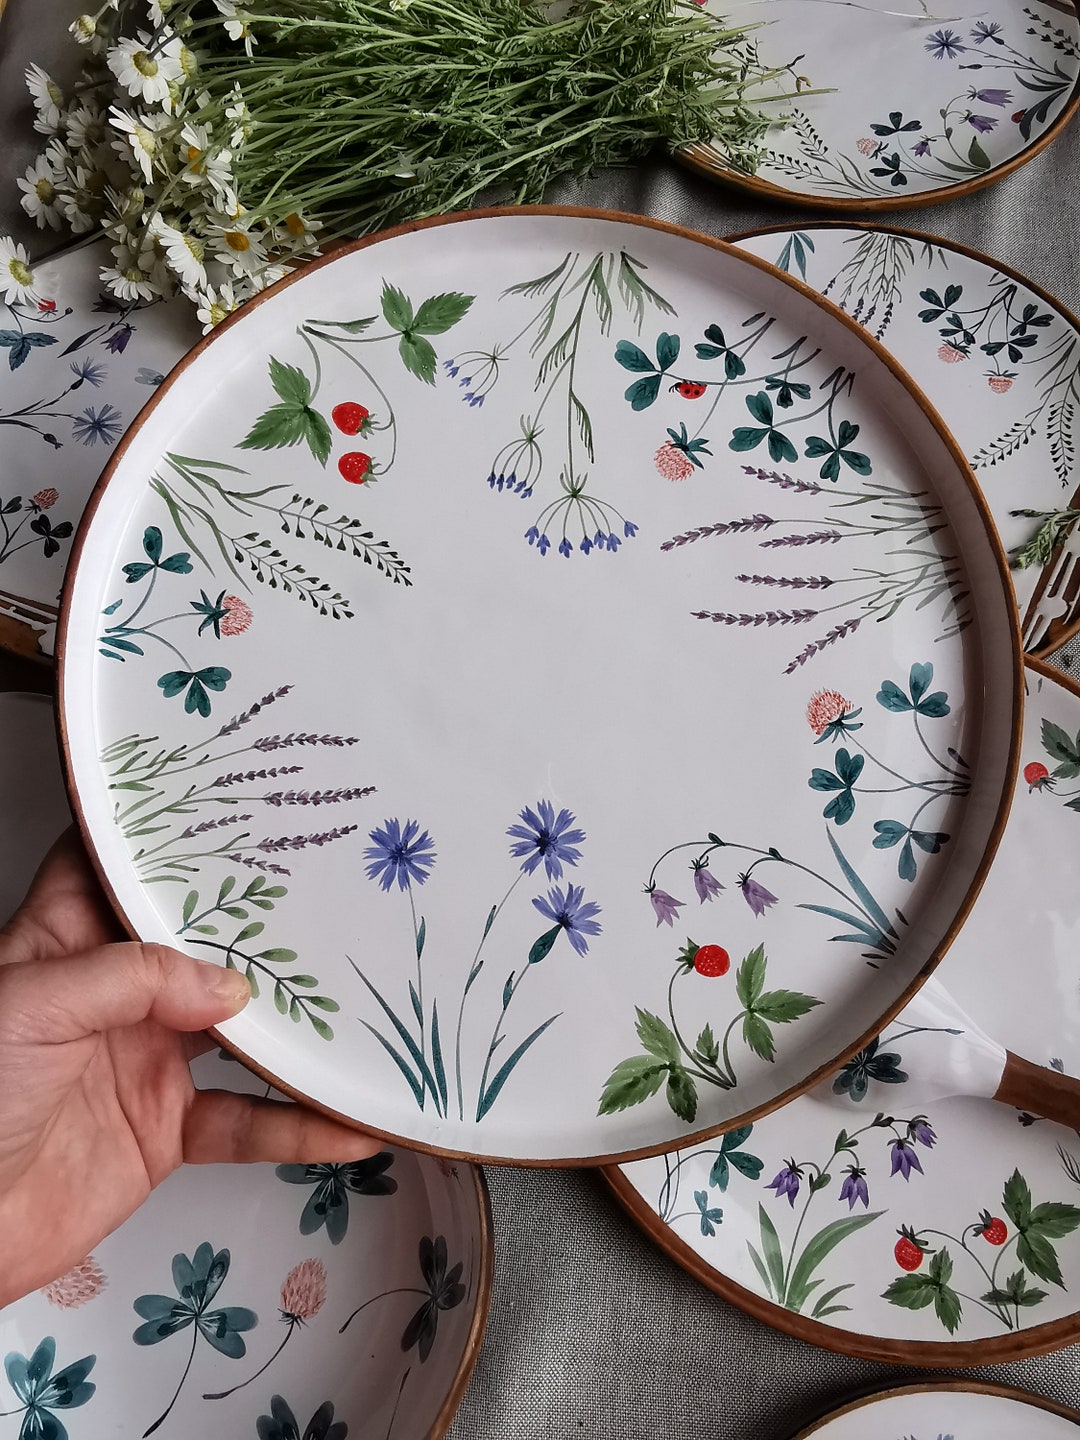 Denmark Dishes, Plate Flowers a Ceramic - Plate, Etsy Dinnerware, Gift, Pottery Collectible Dinner With Art Plate Osoka Gift Handmade Artisan Ceramics